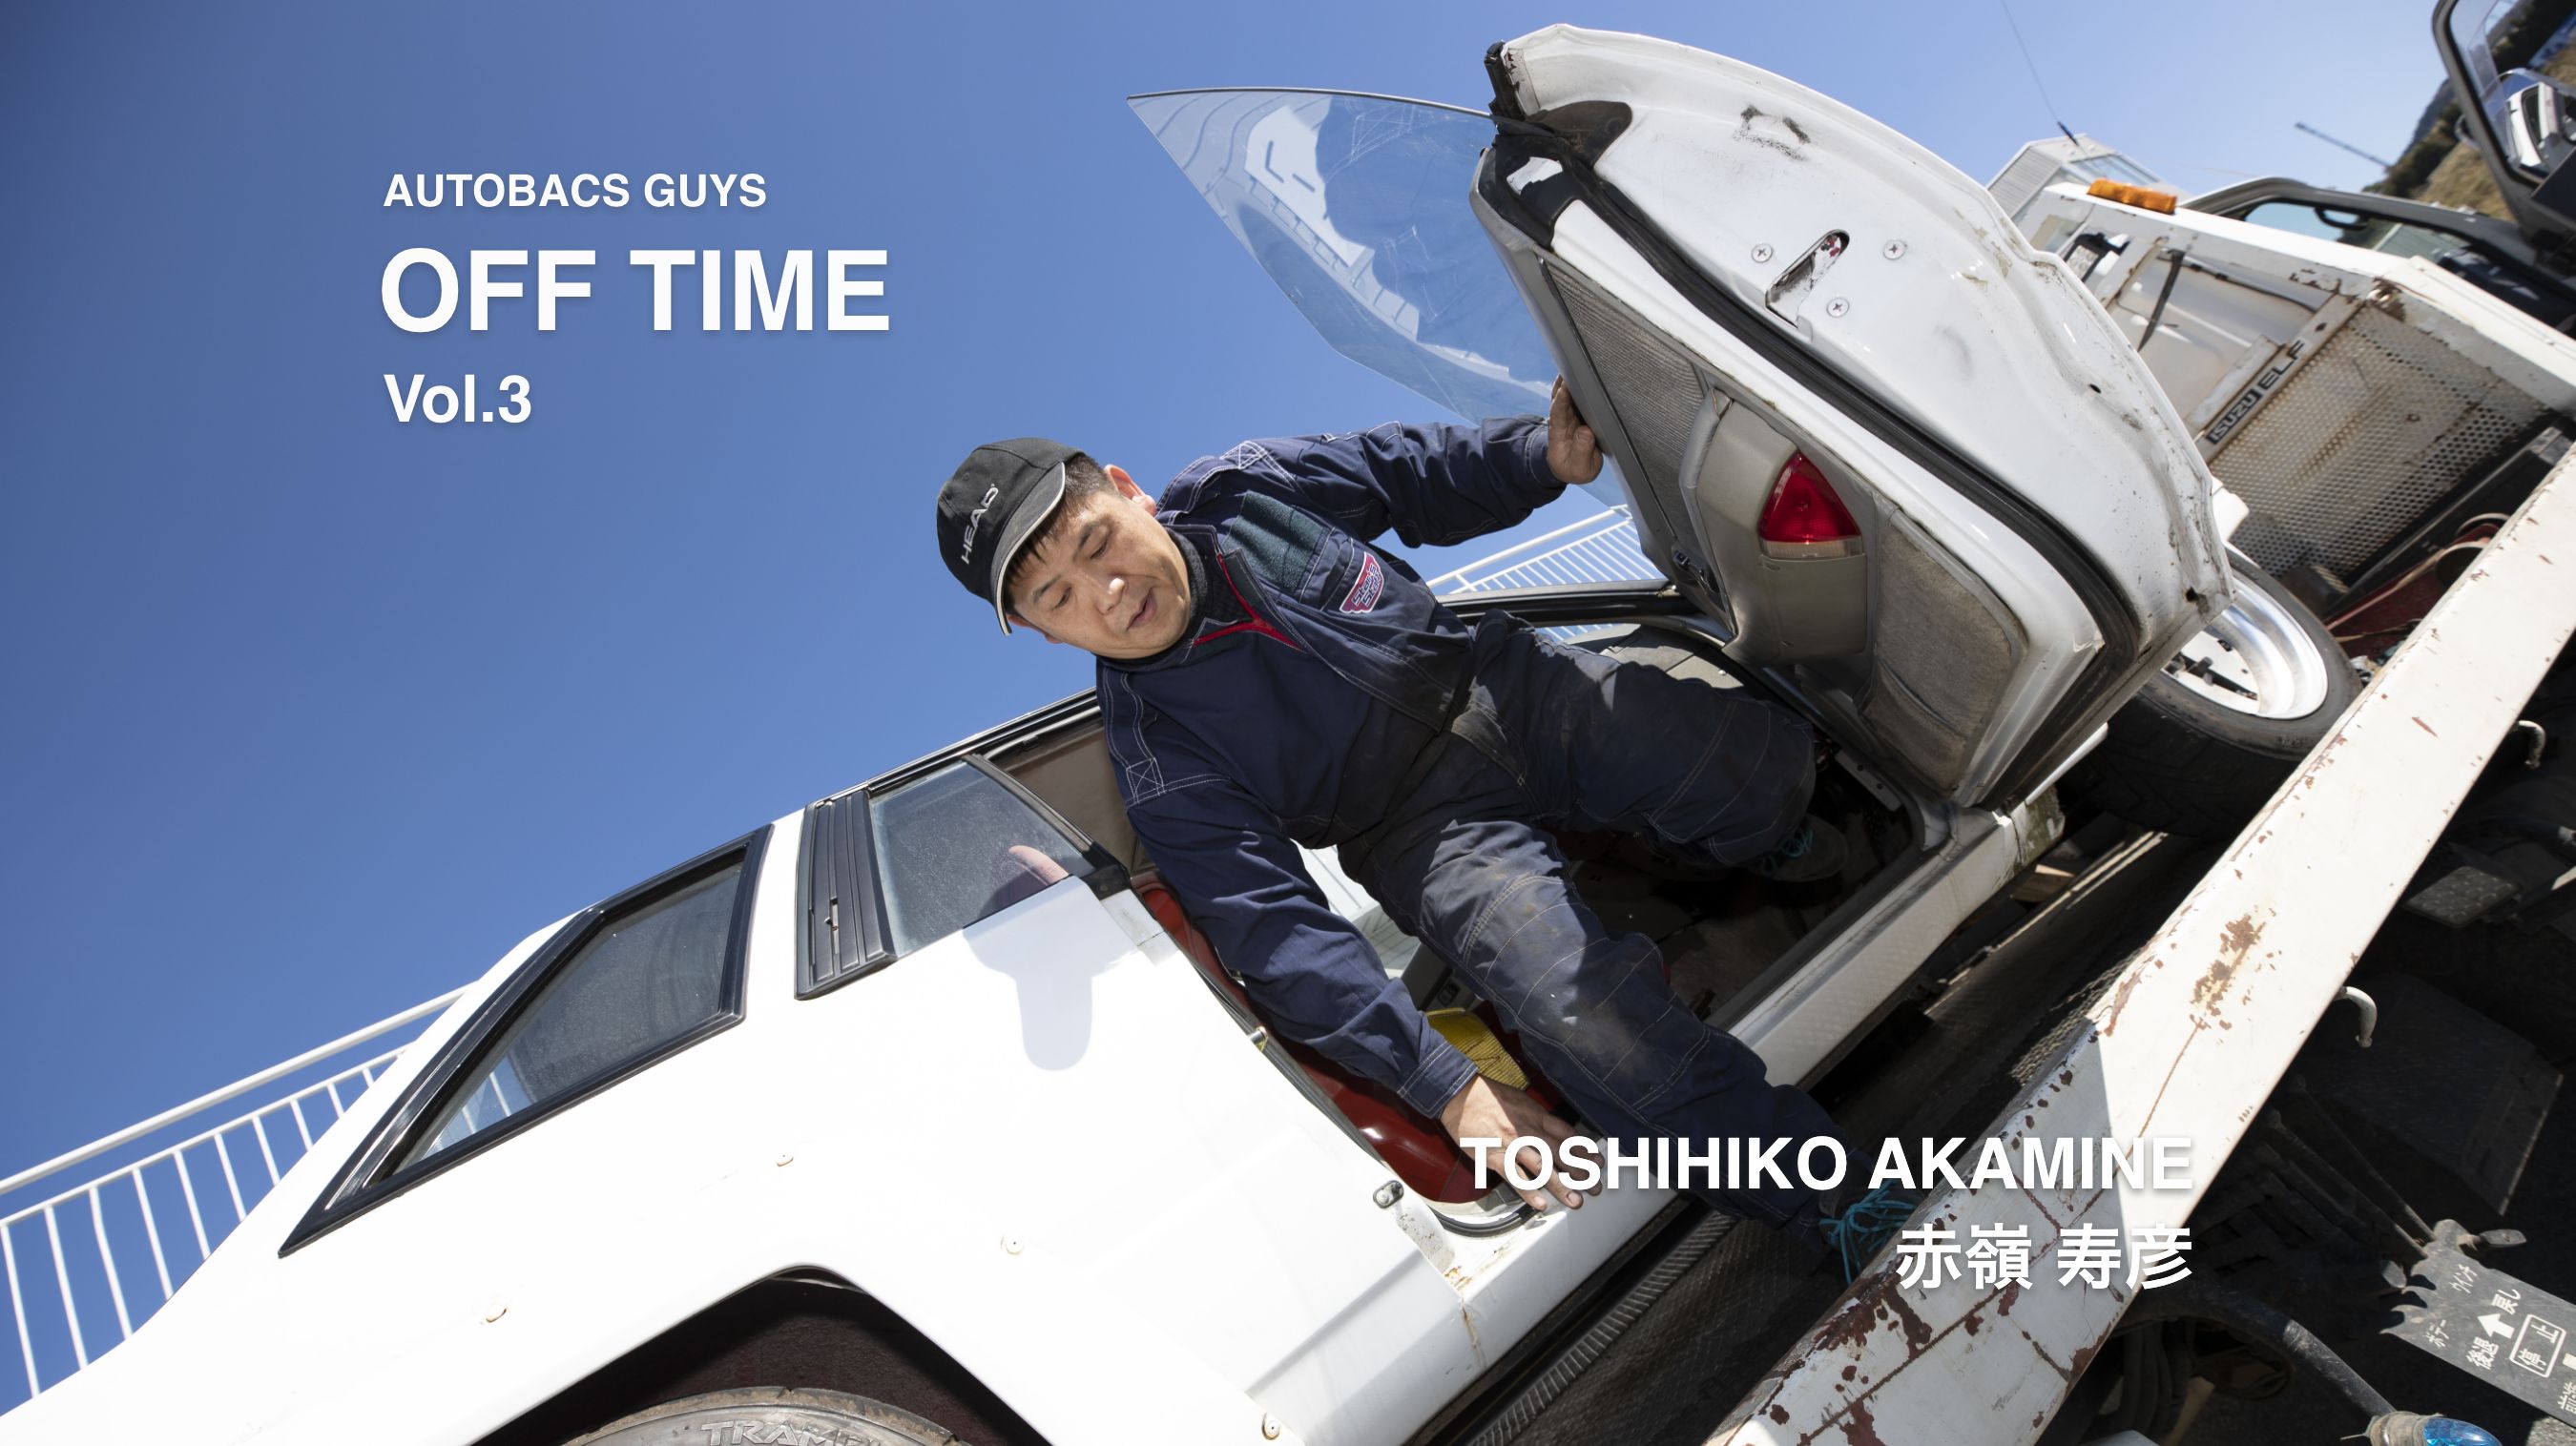 AUTOBACS GUYS OFF TIME / ON TIME オートバックスガイズの裏側　Vol.3 : 赤嶺寿彦 TOSHIHIKO AKAMINE